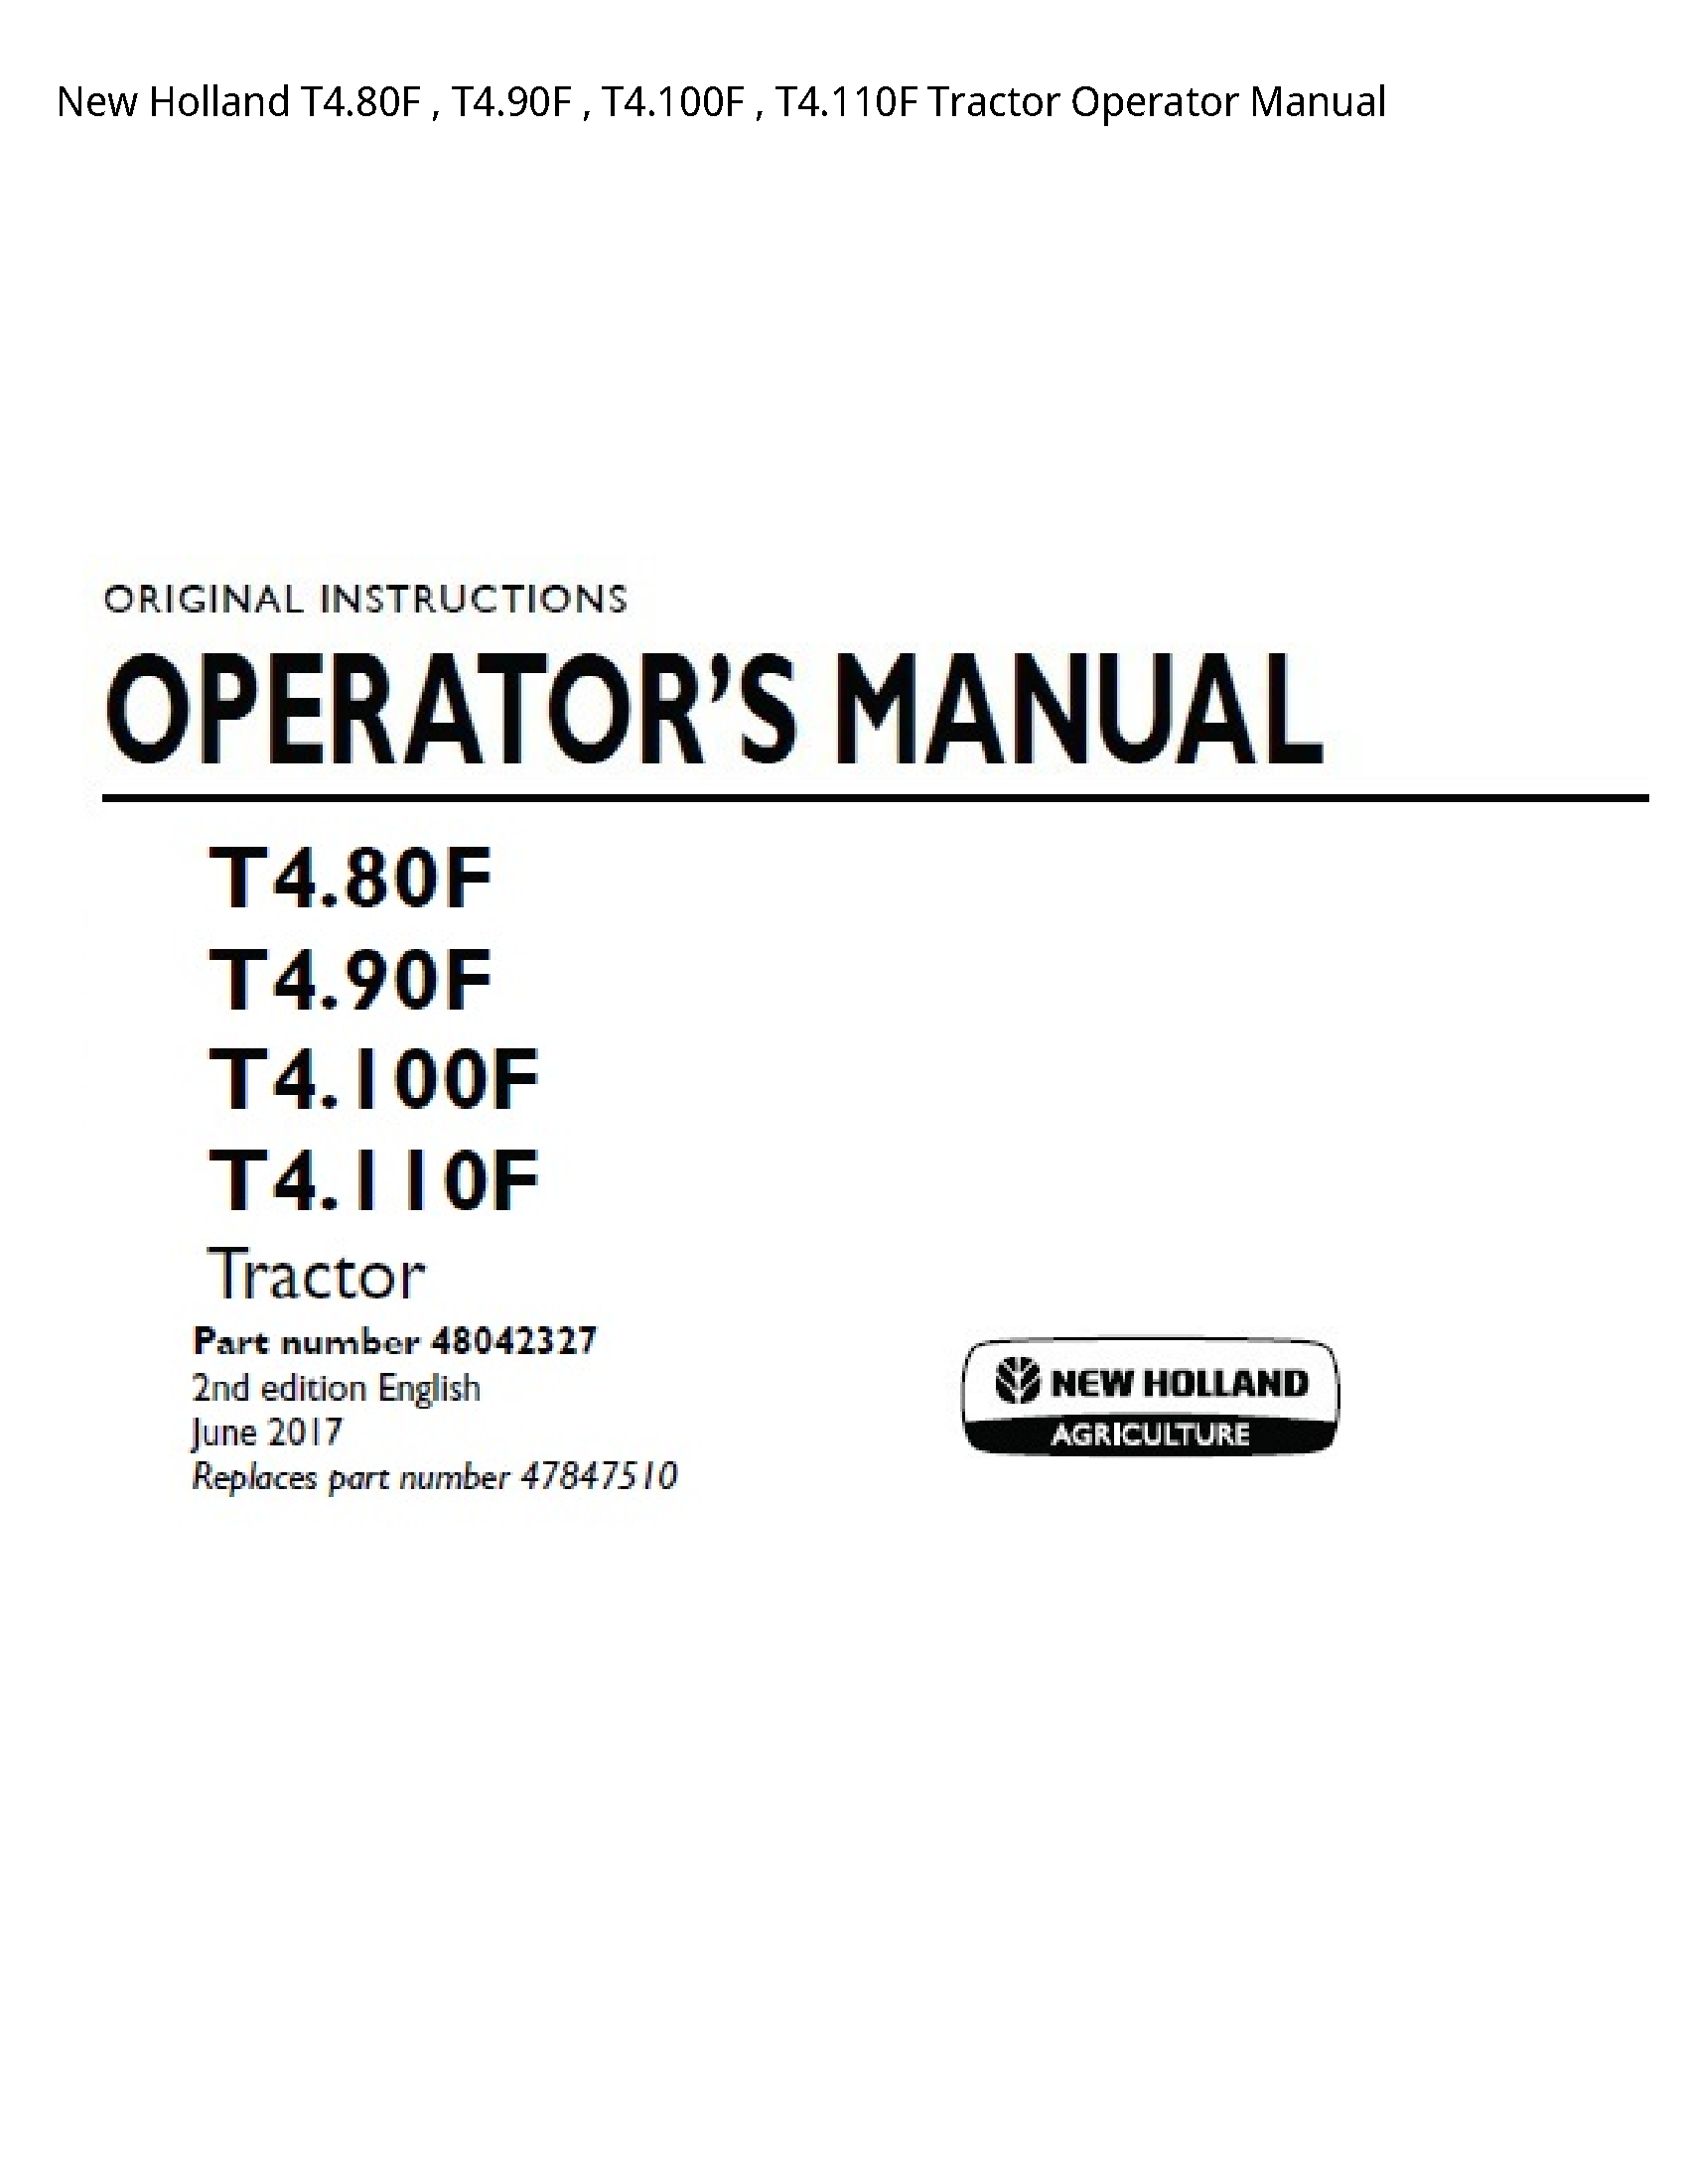 New Holland T4.80F Tractor Operator manual